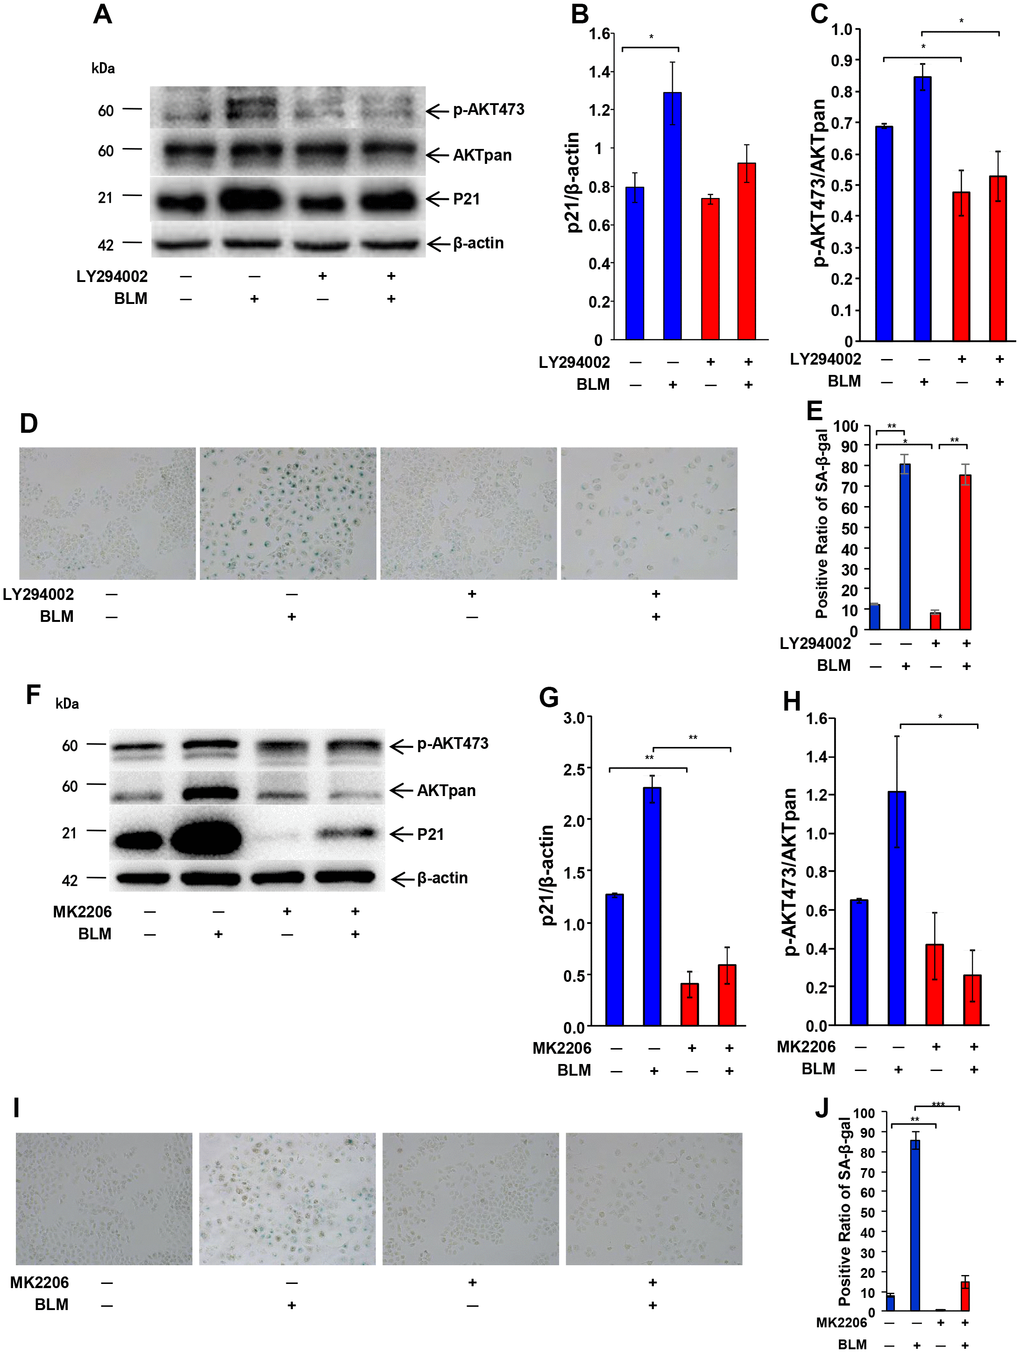 Inhibition of Akt activation attenuates AEC senescence. Inhibitor (20 μm/L LY294002 or 5 μg/ml MK2206) of the AKT pathway was added 1 hour before bleomycin (10 μg/ml). After 72 hours, the medium was changed to fresh medium for 24 hours. AKT inactivation and P21WAF1 expression induced by LY294002 (A–C) or MK2206 (F–H) were detected by western blotting. Cellular senescence after inhibitor LY294002 (D, E) or MK2206 (I, J) pretreatment was analyzed by SA-β-Gal staining. Data are shown as the mean ± SEM, n ≥ 3 per group. *p 